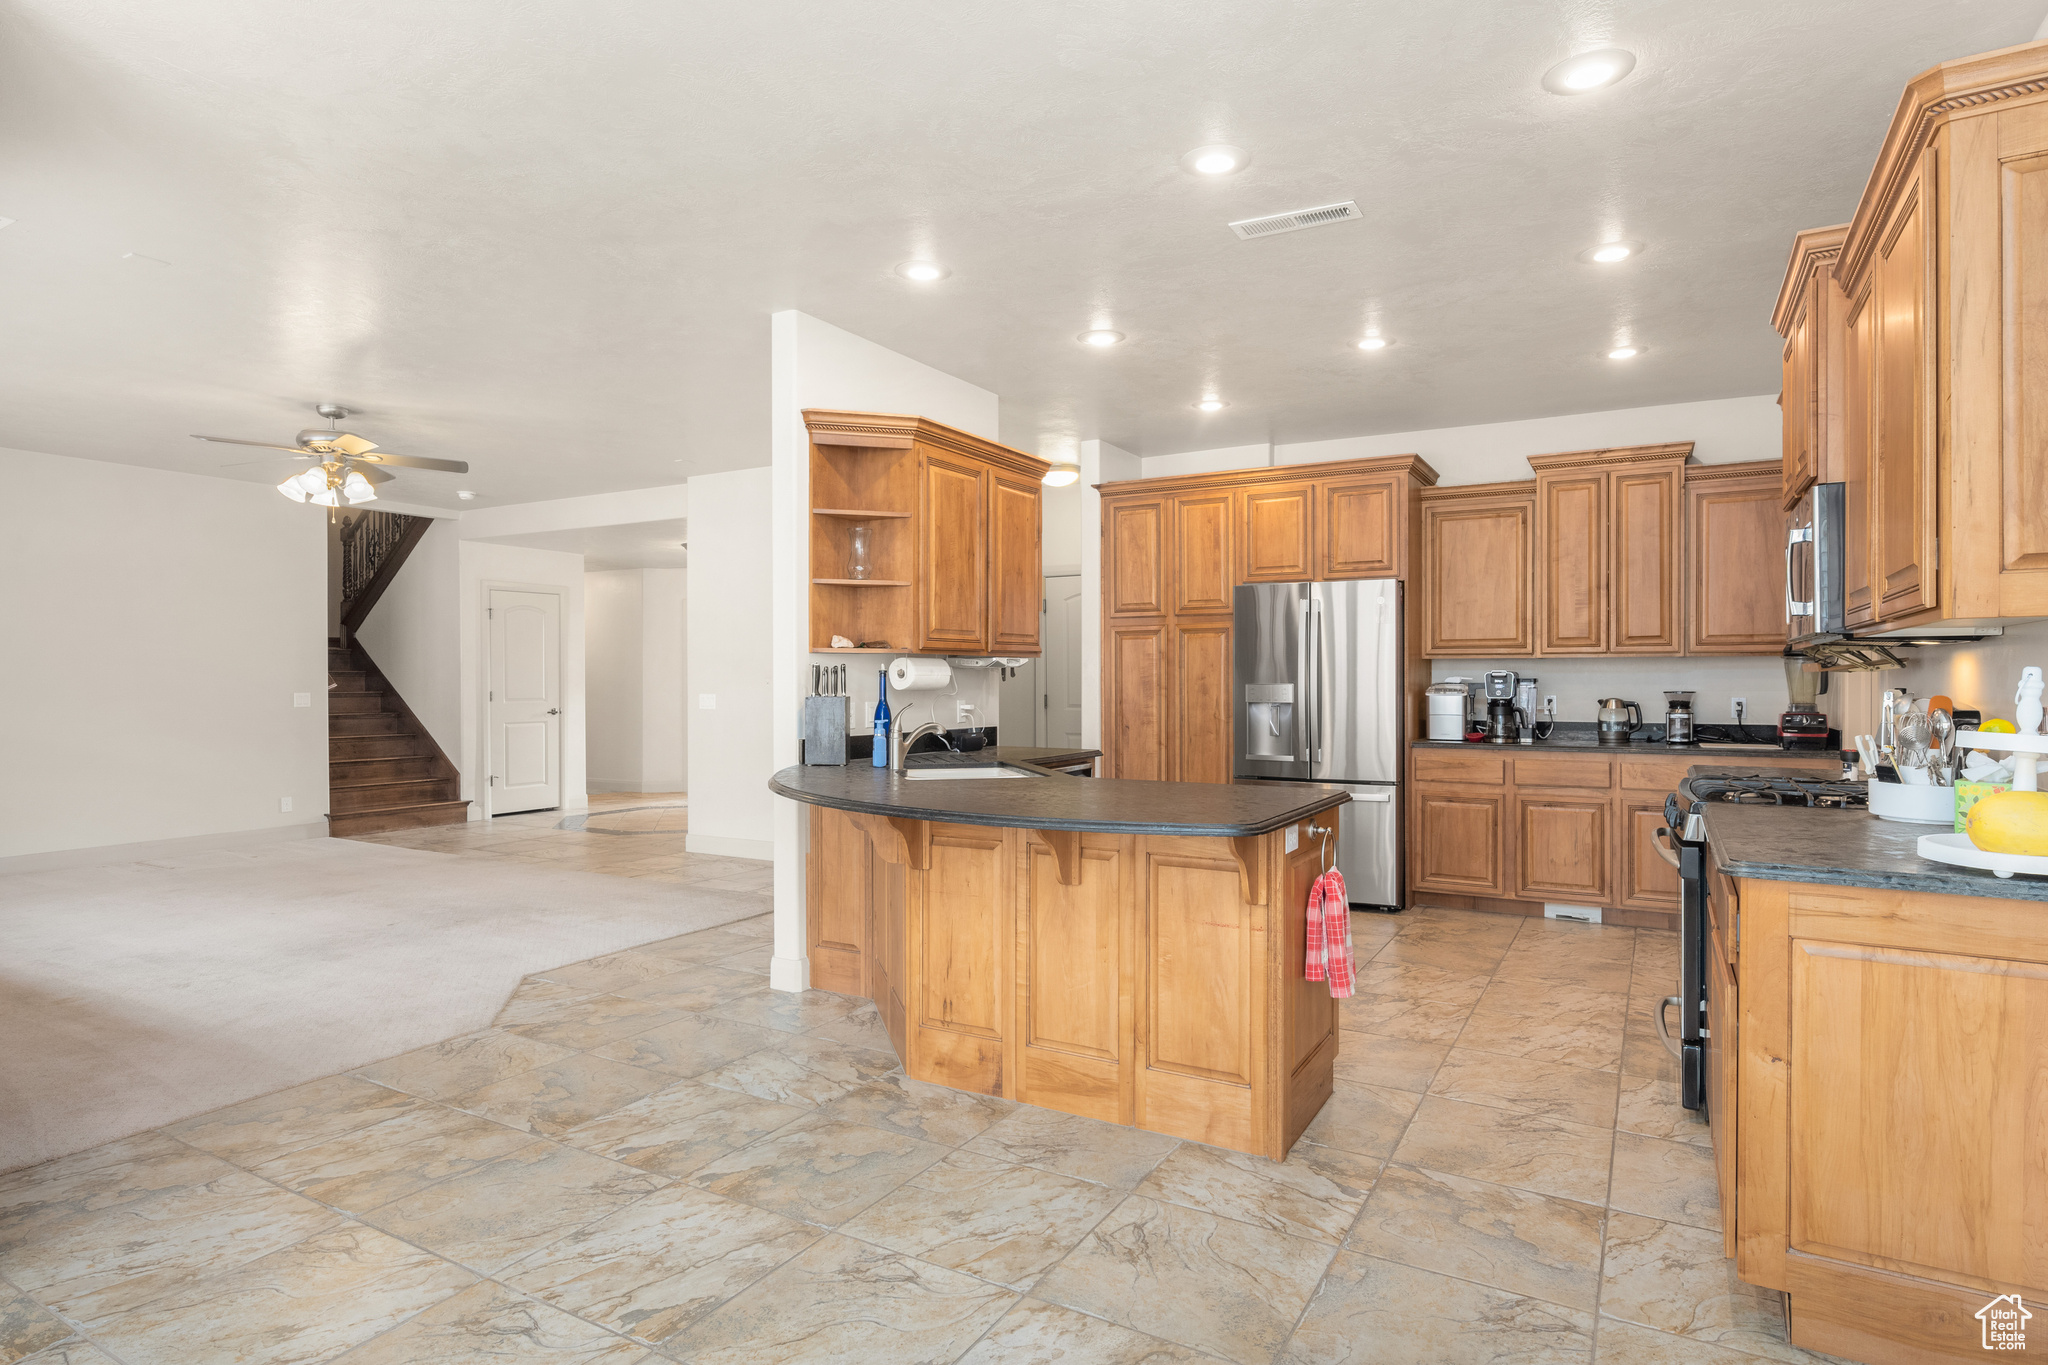 Kitchen featuring a kitchen breakfast bar, ceiling fan, light colored carpet, appliances with stainless steel finishes, and sink